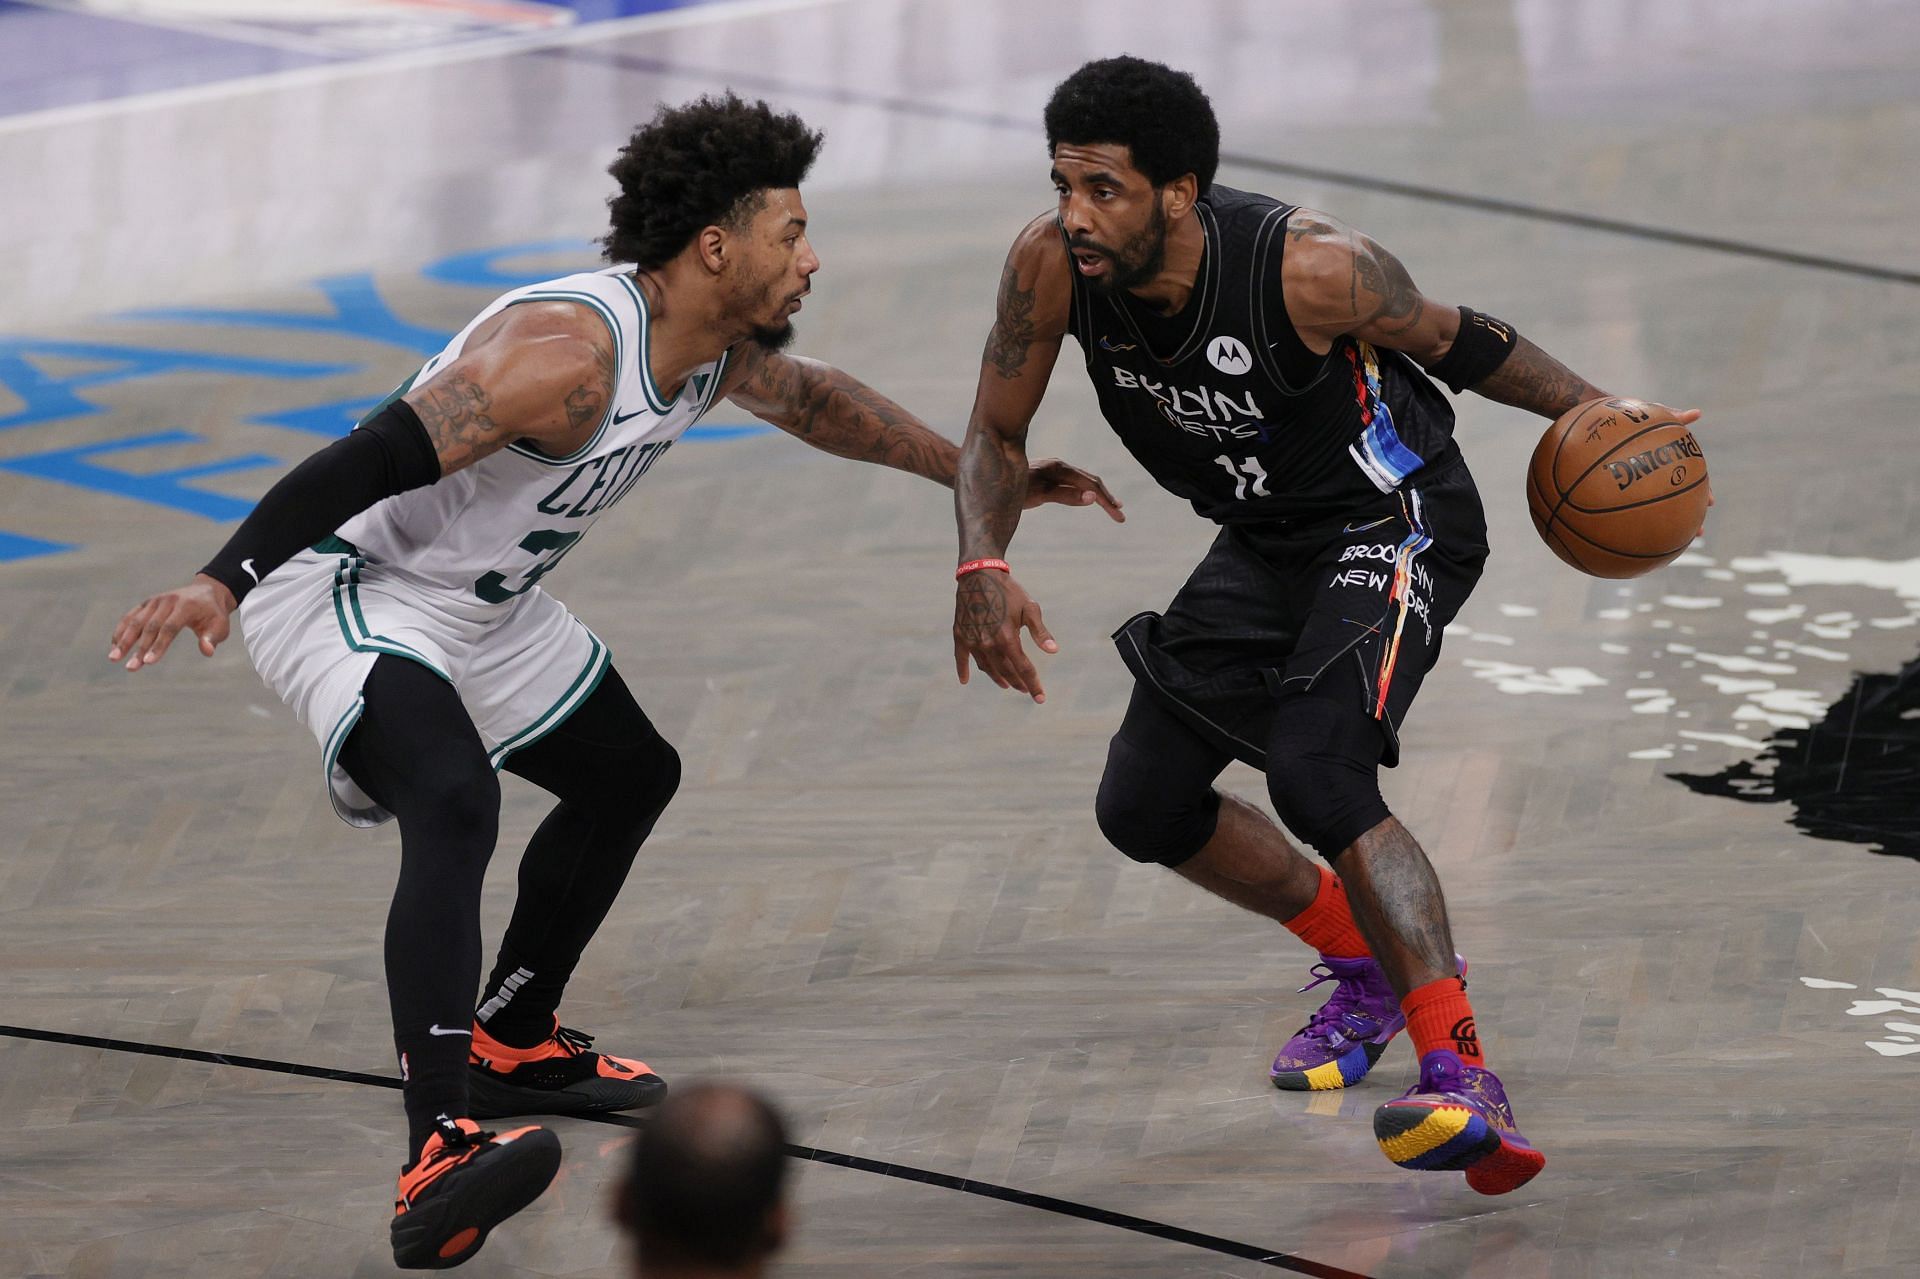 Kyrie Irving (#11) of the Brooklyn Nets dribbles as Marcus Smart (#36) of the Boston Celtics defends.